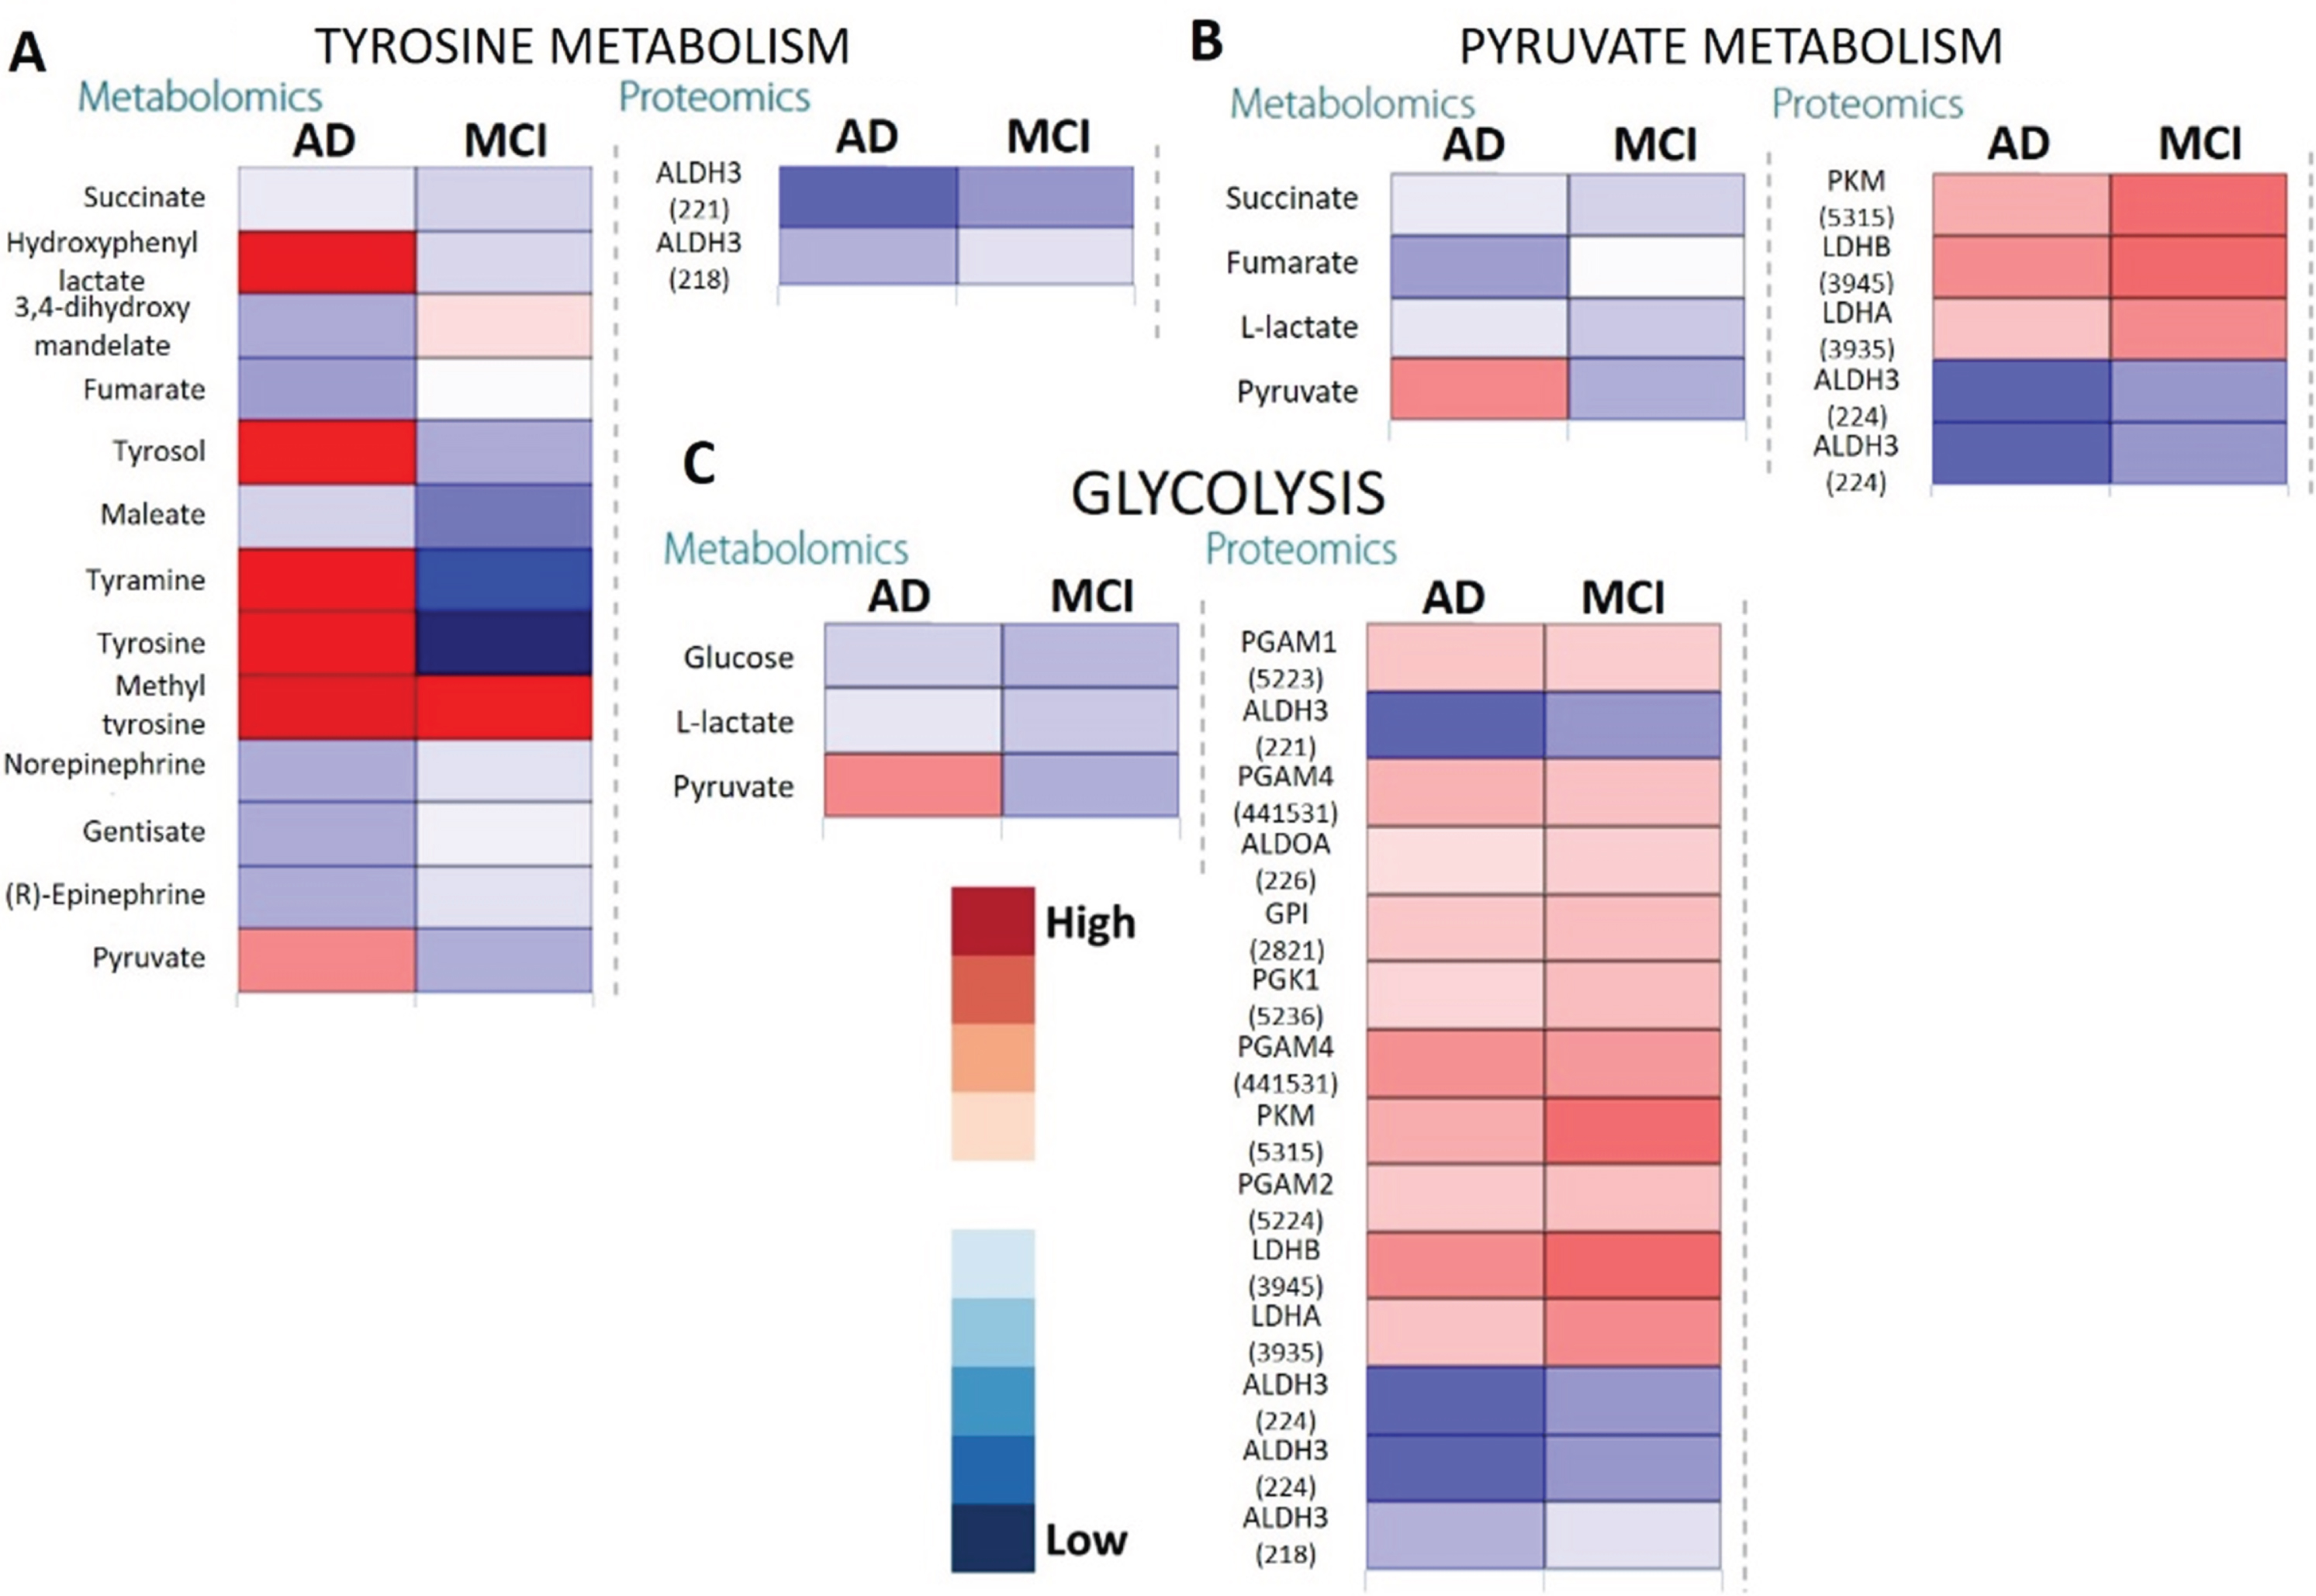 Heatmaps showing metabolomic and proteomic expressions during (A) Tyrosine metabolism, (B) Pyruvate metabolism, and (C) Glycolysis in the salivary matrix of AD and MCI patients with respect to control representatives (non-AD/MCI patients). The metabolites and proteins used in the multi-omics integration were selected based on the fold changes (Log2FC≥1.00 or Log2FC≤–1.00) with statistically significant differences False discovery rates (FDR≤0.05)). Note: The numerical IDs in parenthesis indicate Entrez Gene IDs of the proteins involved in these pathways.